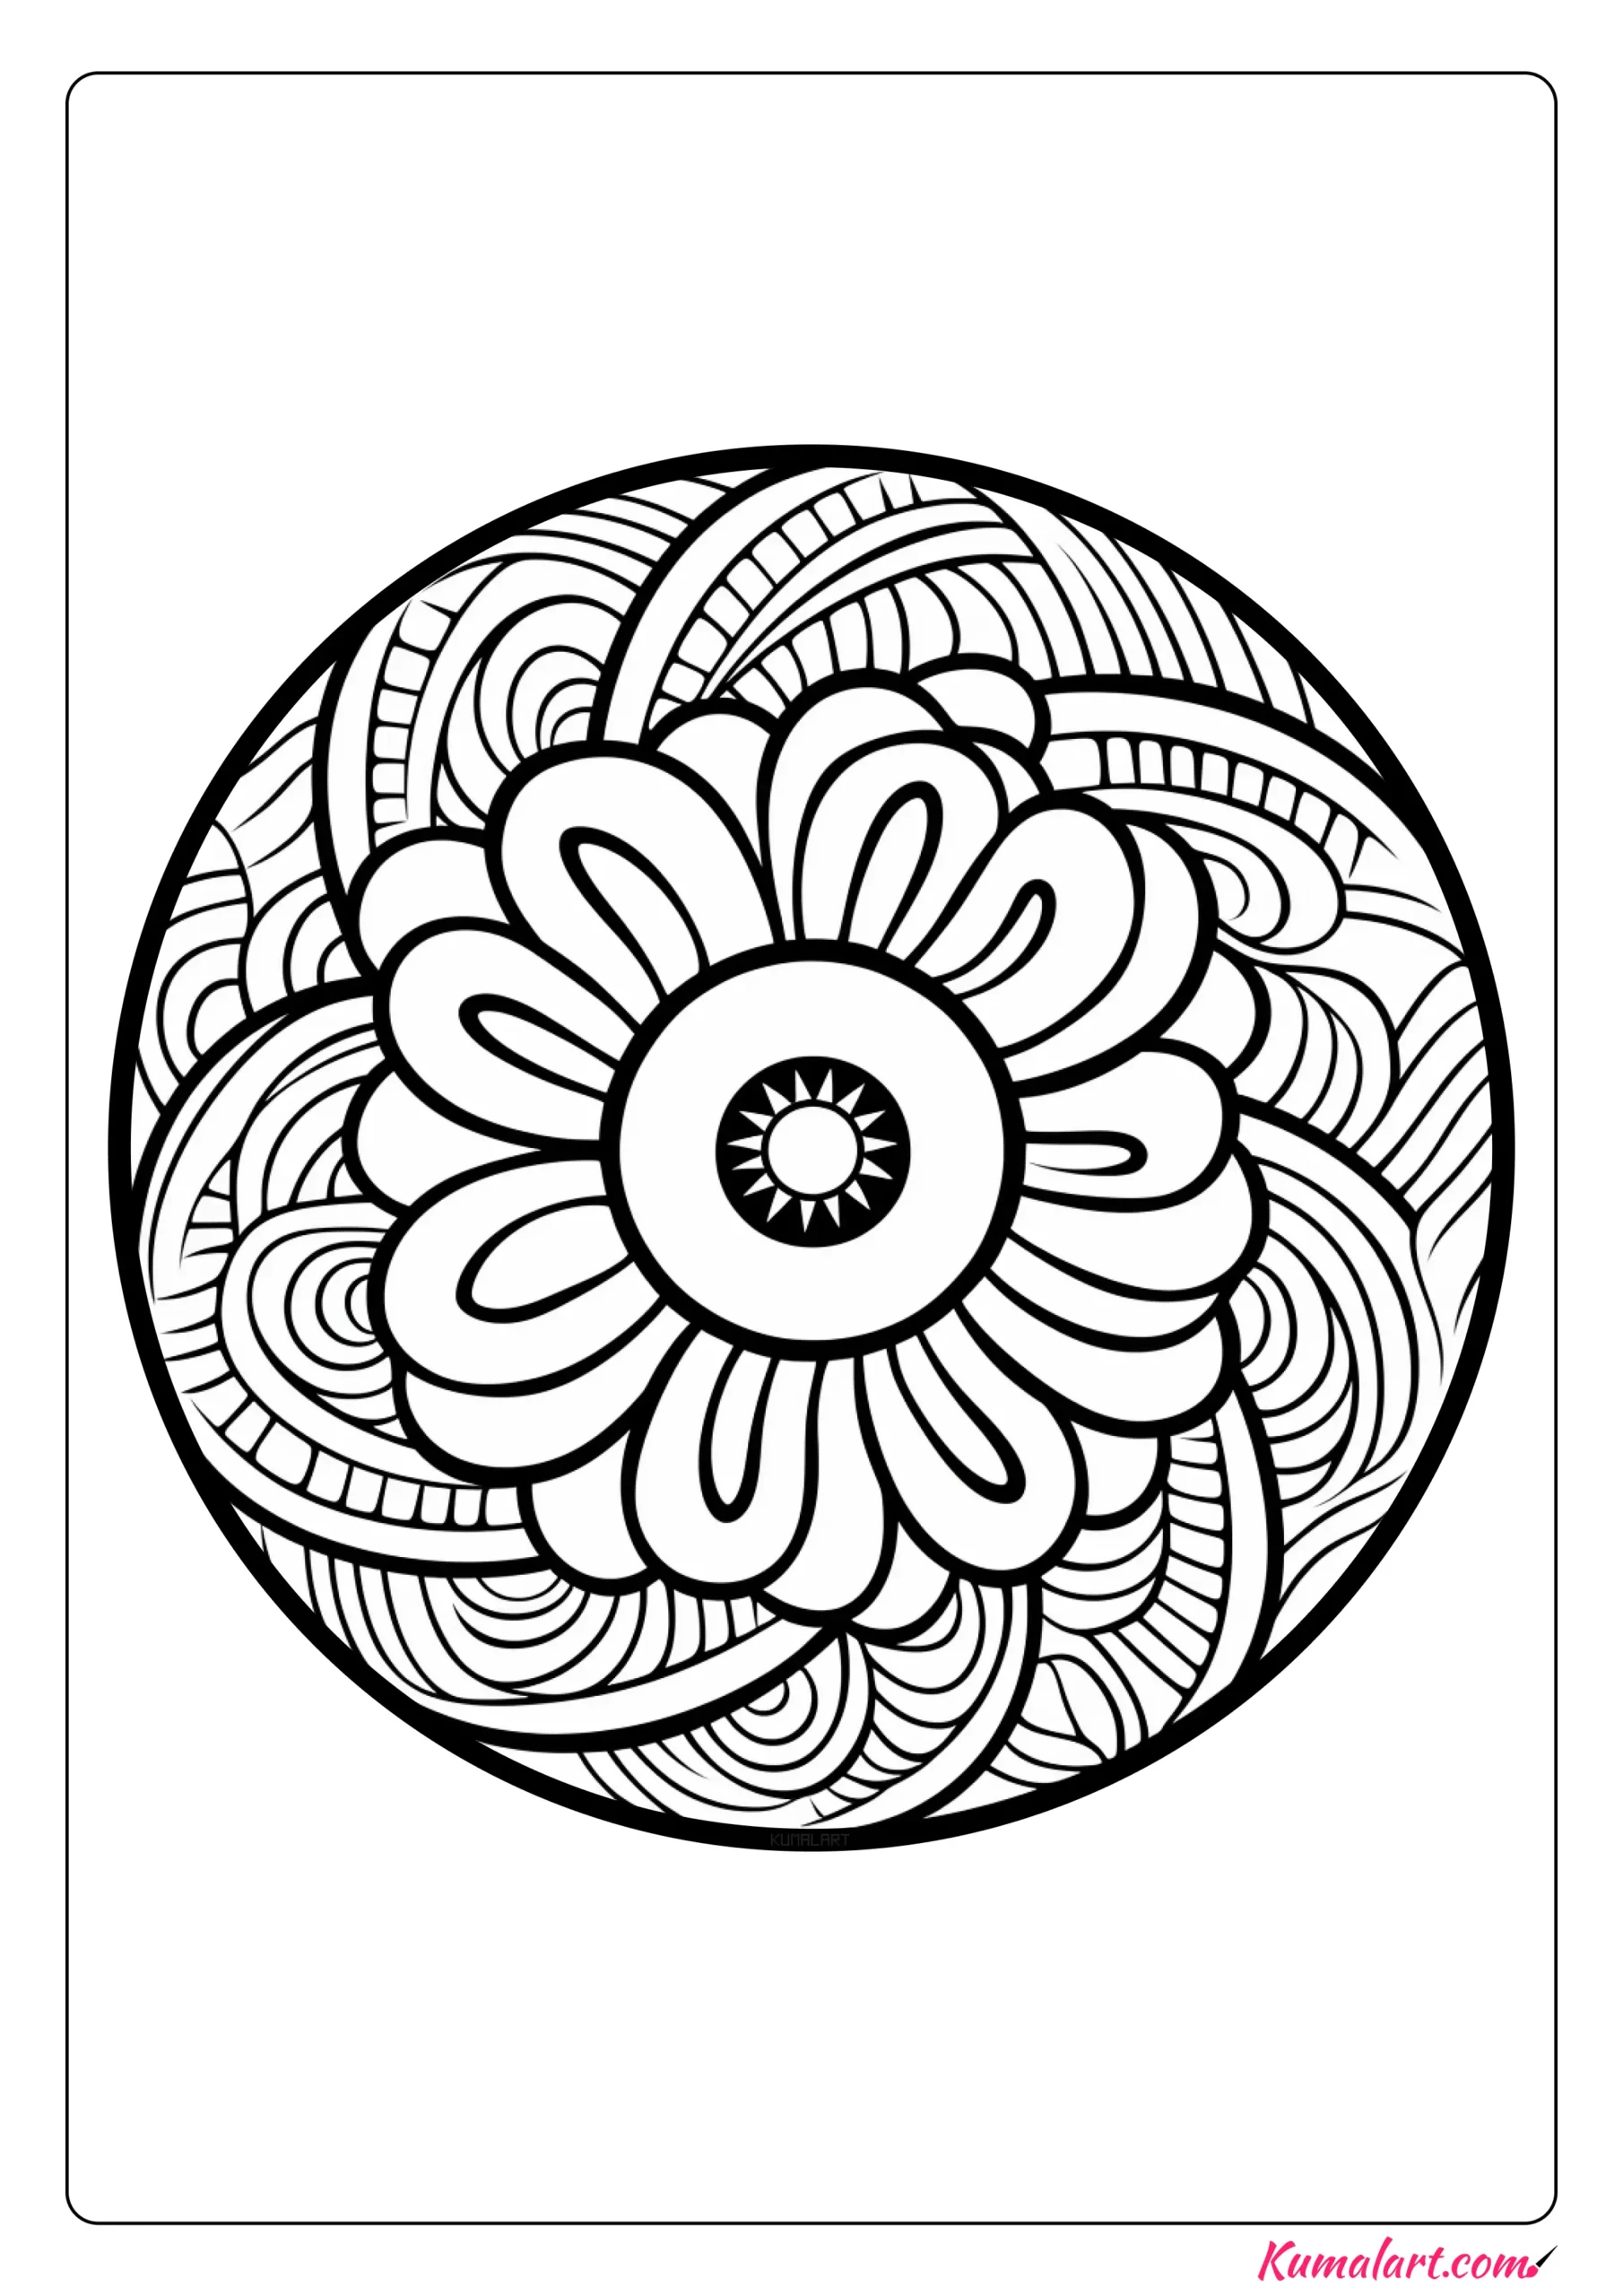 Healing Therapeutic Coloring Page